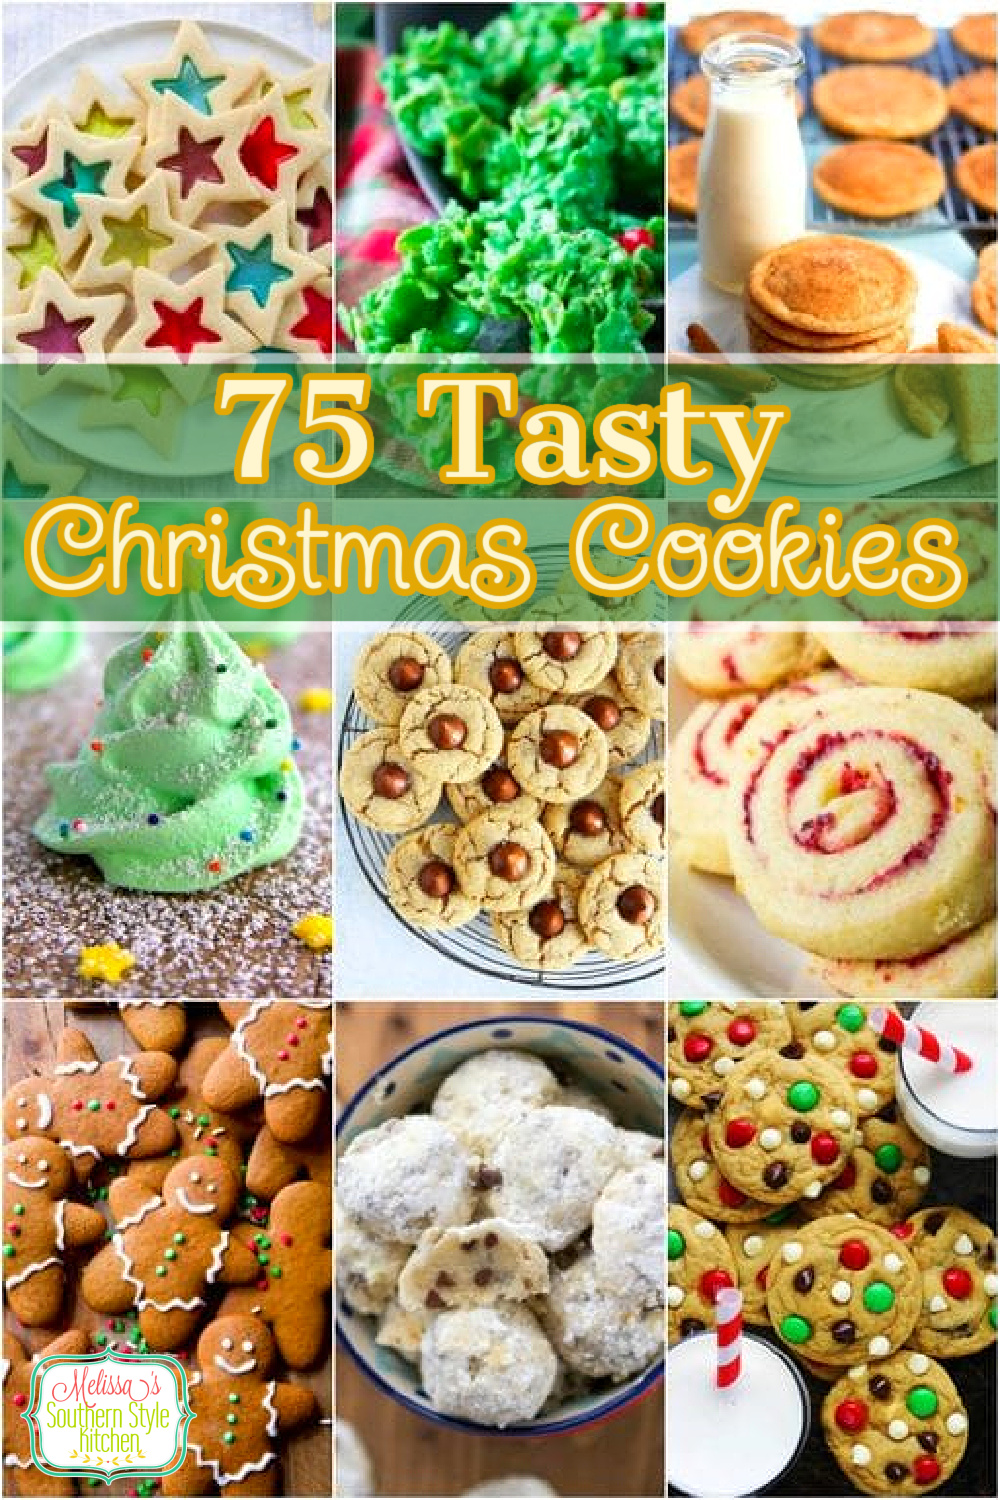 Plan a cookie swap with this collection of 75 Tasty Christmas Cookies #christmascookies #bestchristmascookies #cookierecipes #holidayrecipes #christmasbaking #cookieswap #cookieexchange #bestcookierecipes #desserts #dessertfoodrecipes #southernrecipes #southernfood #melissassouthernstylekitchen